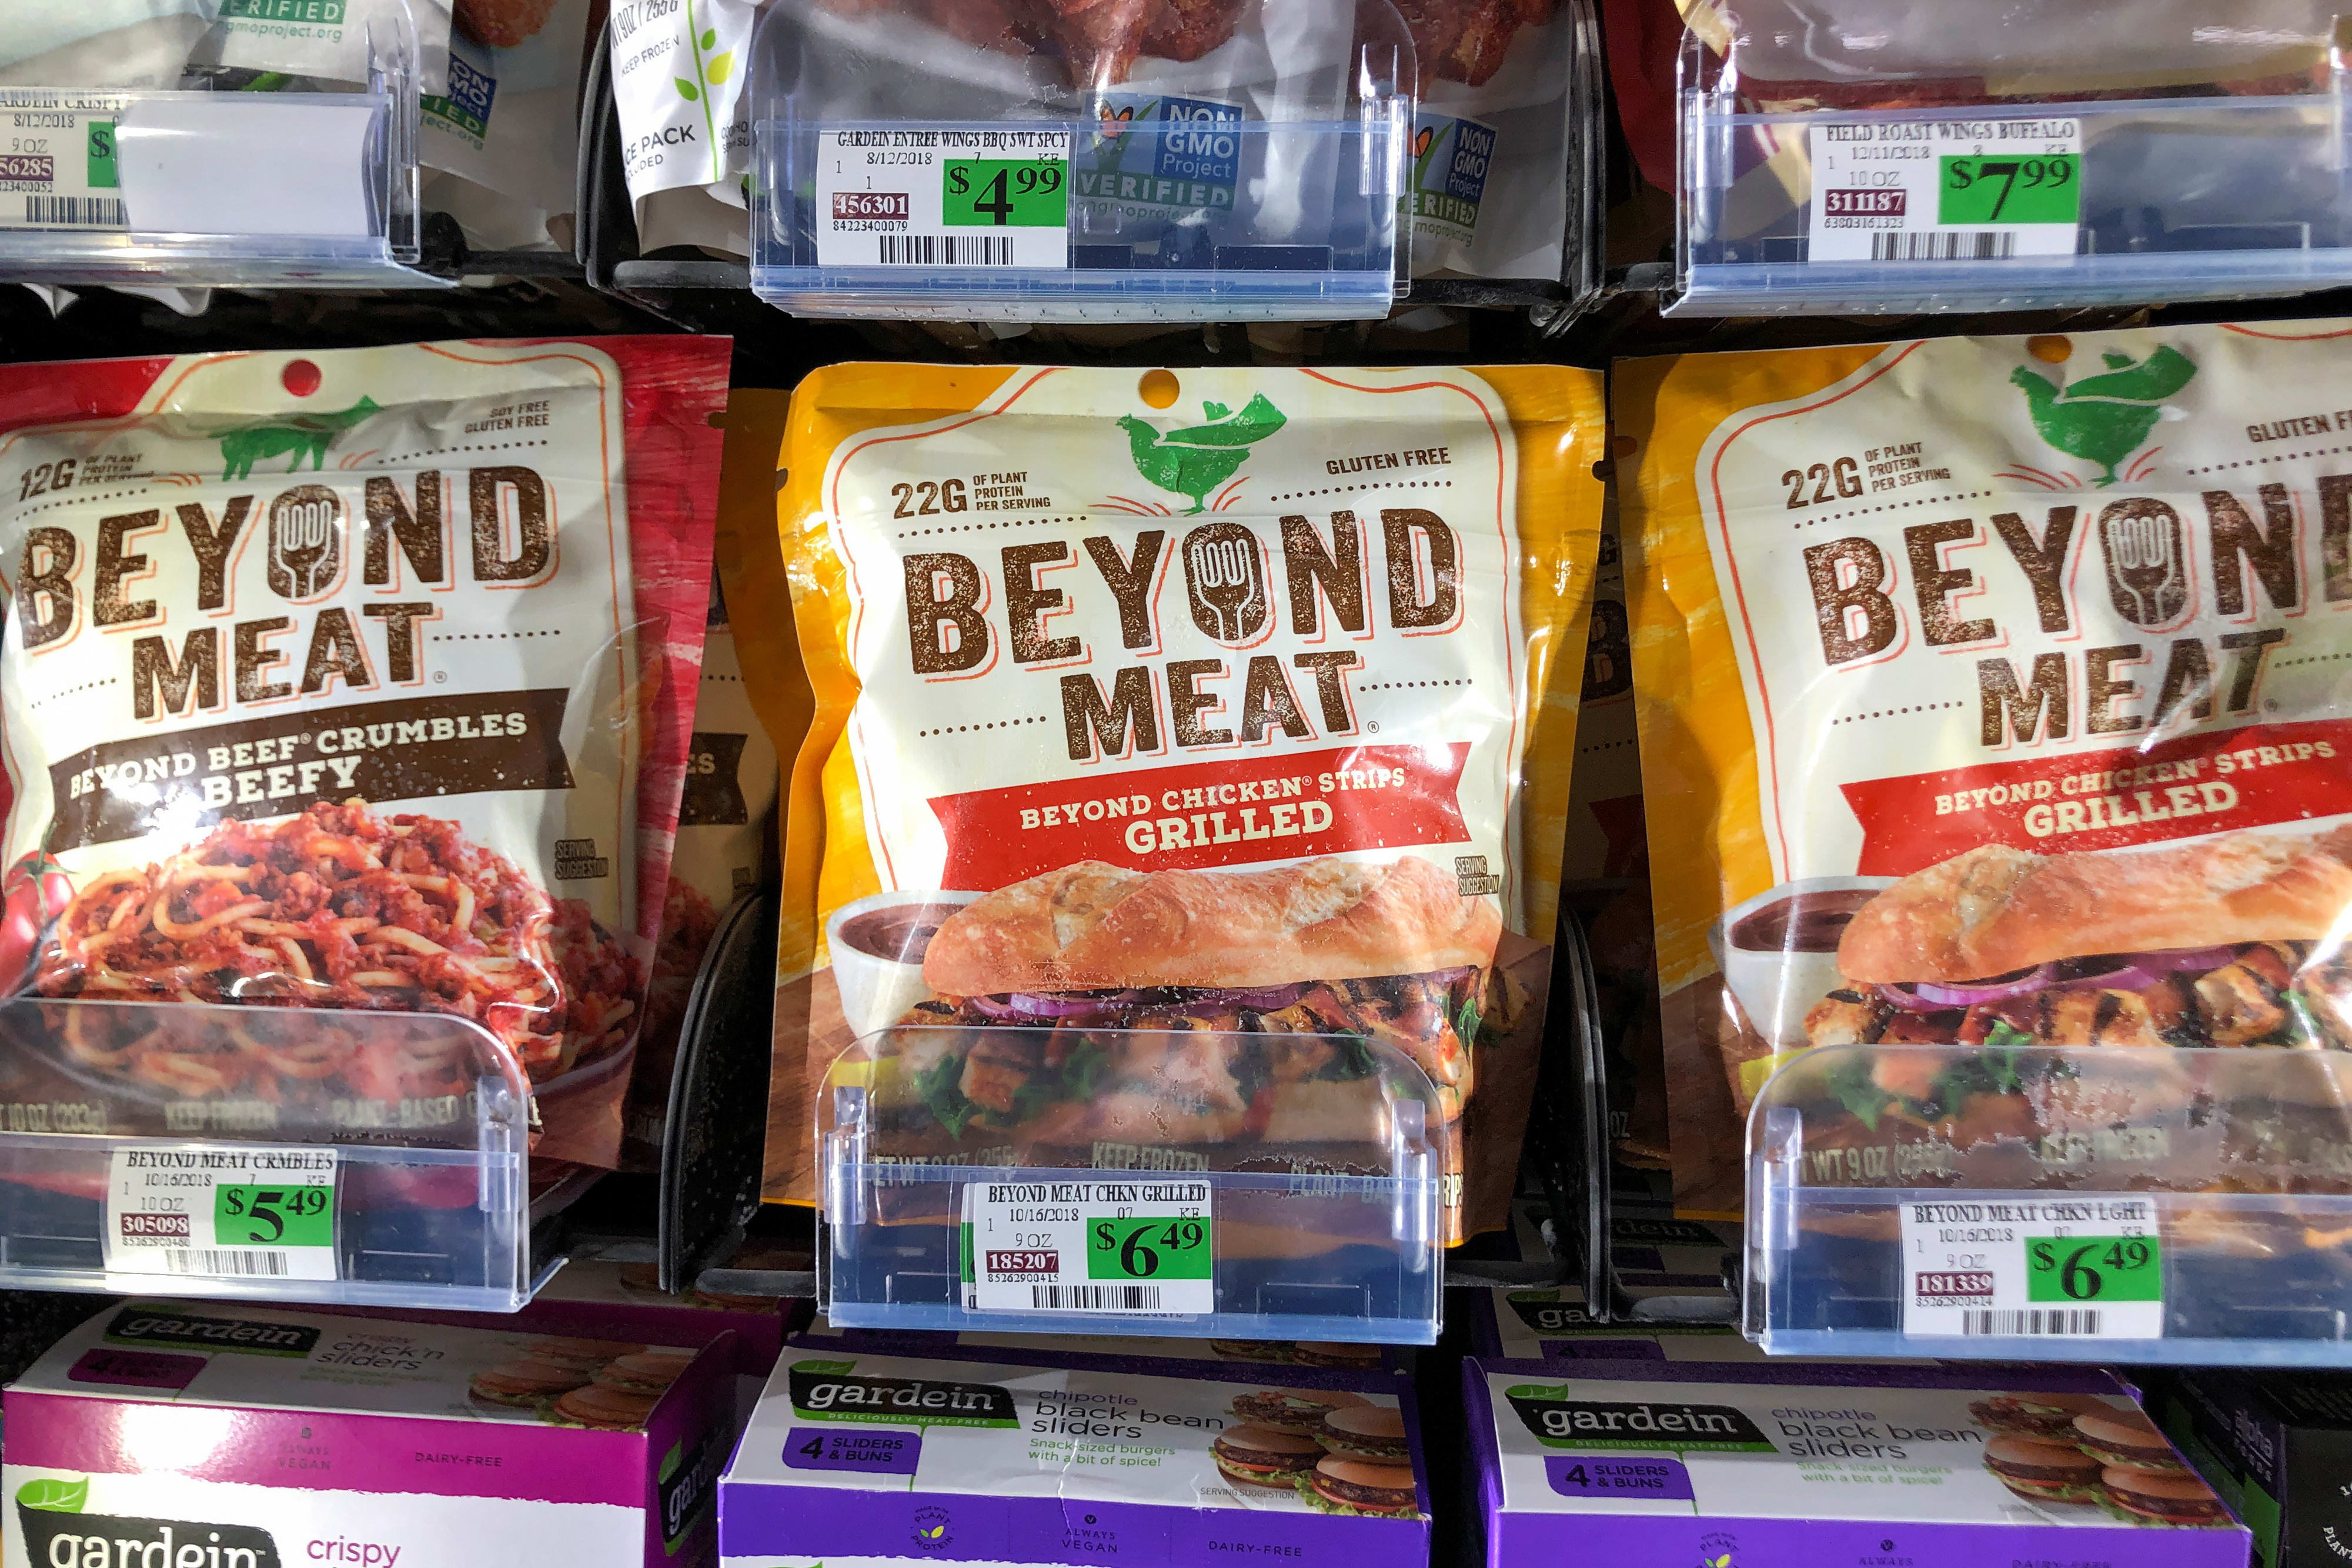 Beyond Meat protein supplier gets $75 million investment from Cargill